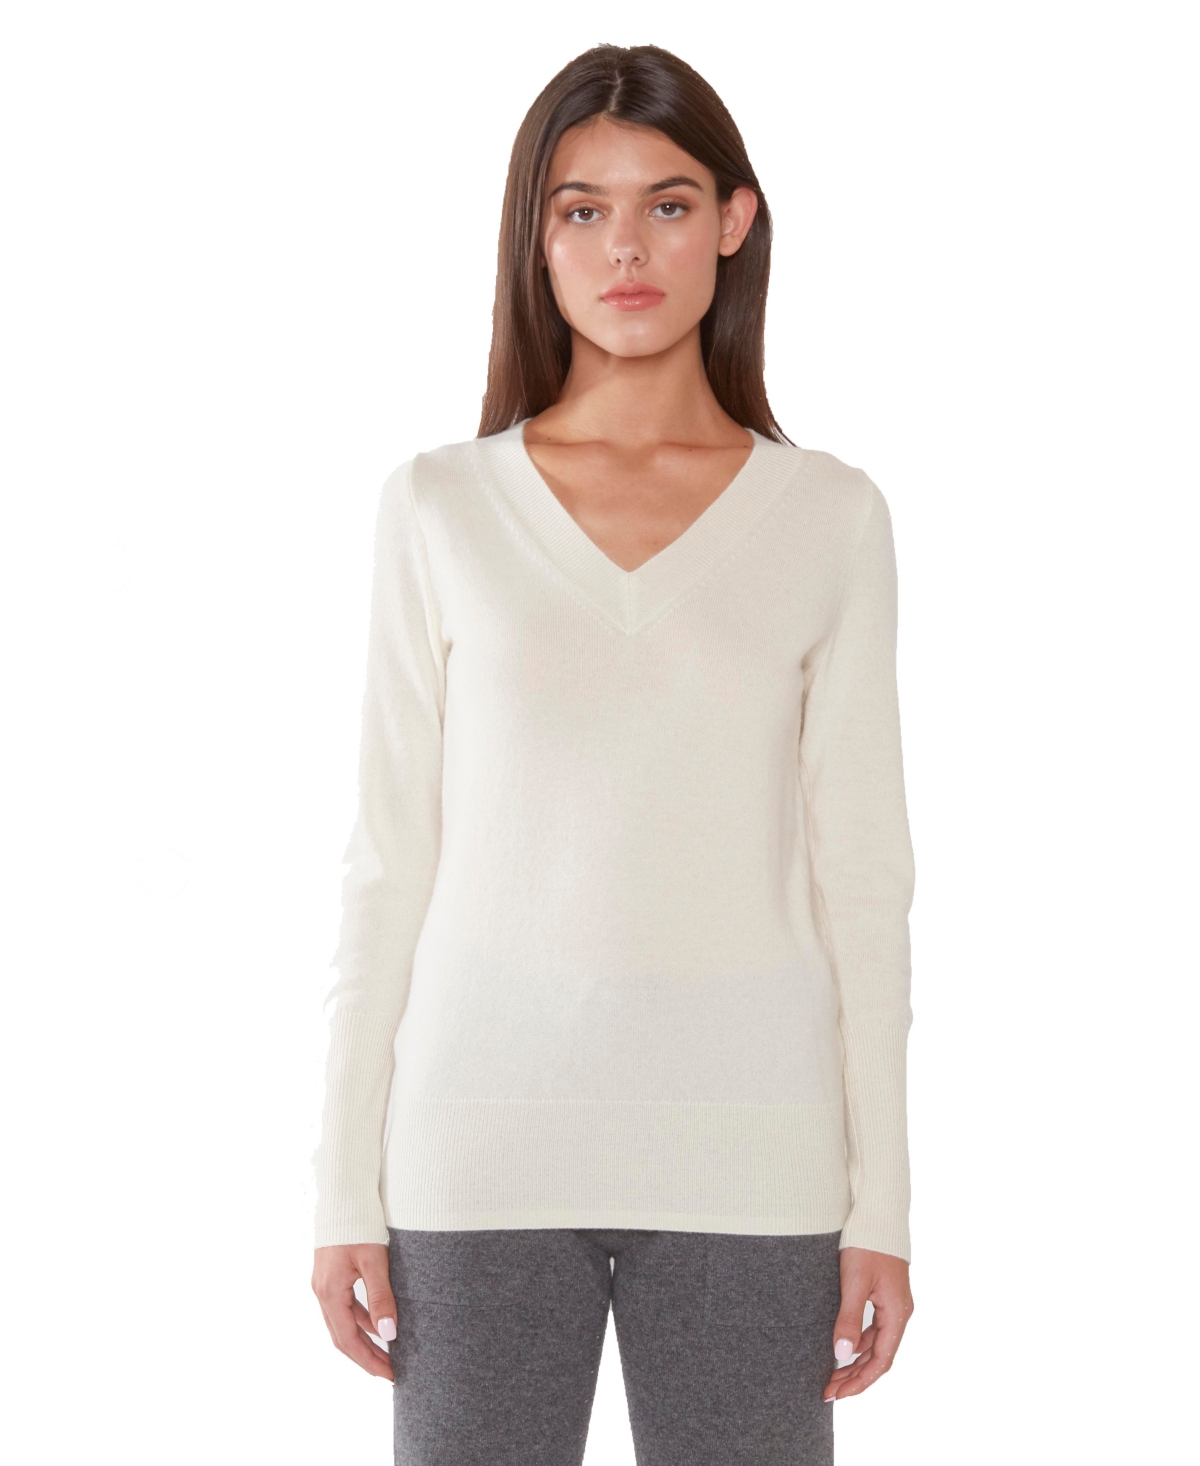 Women's 100% Pure Cashmere Long Sleeve Ava V Neck Pullover Sweater - Cream